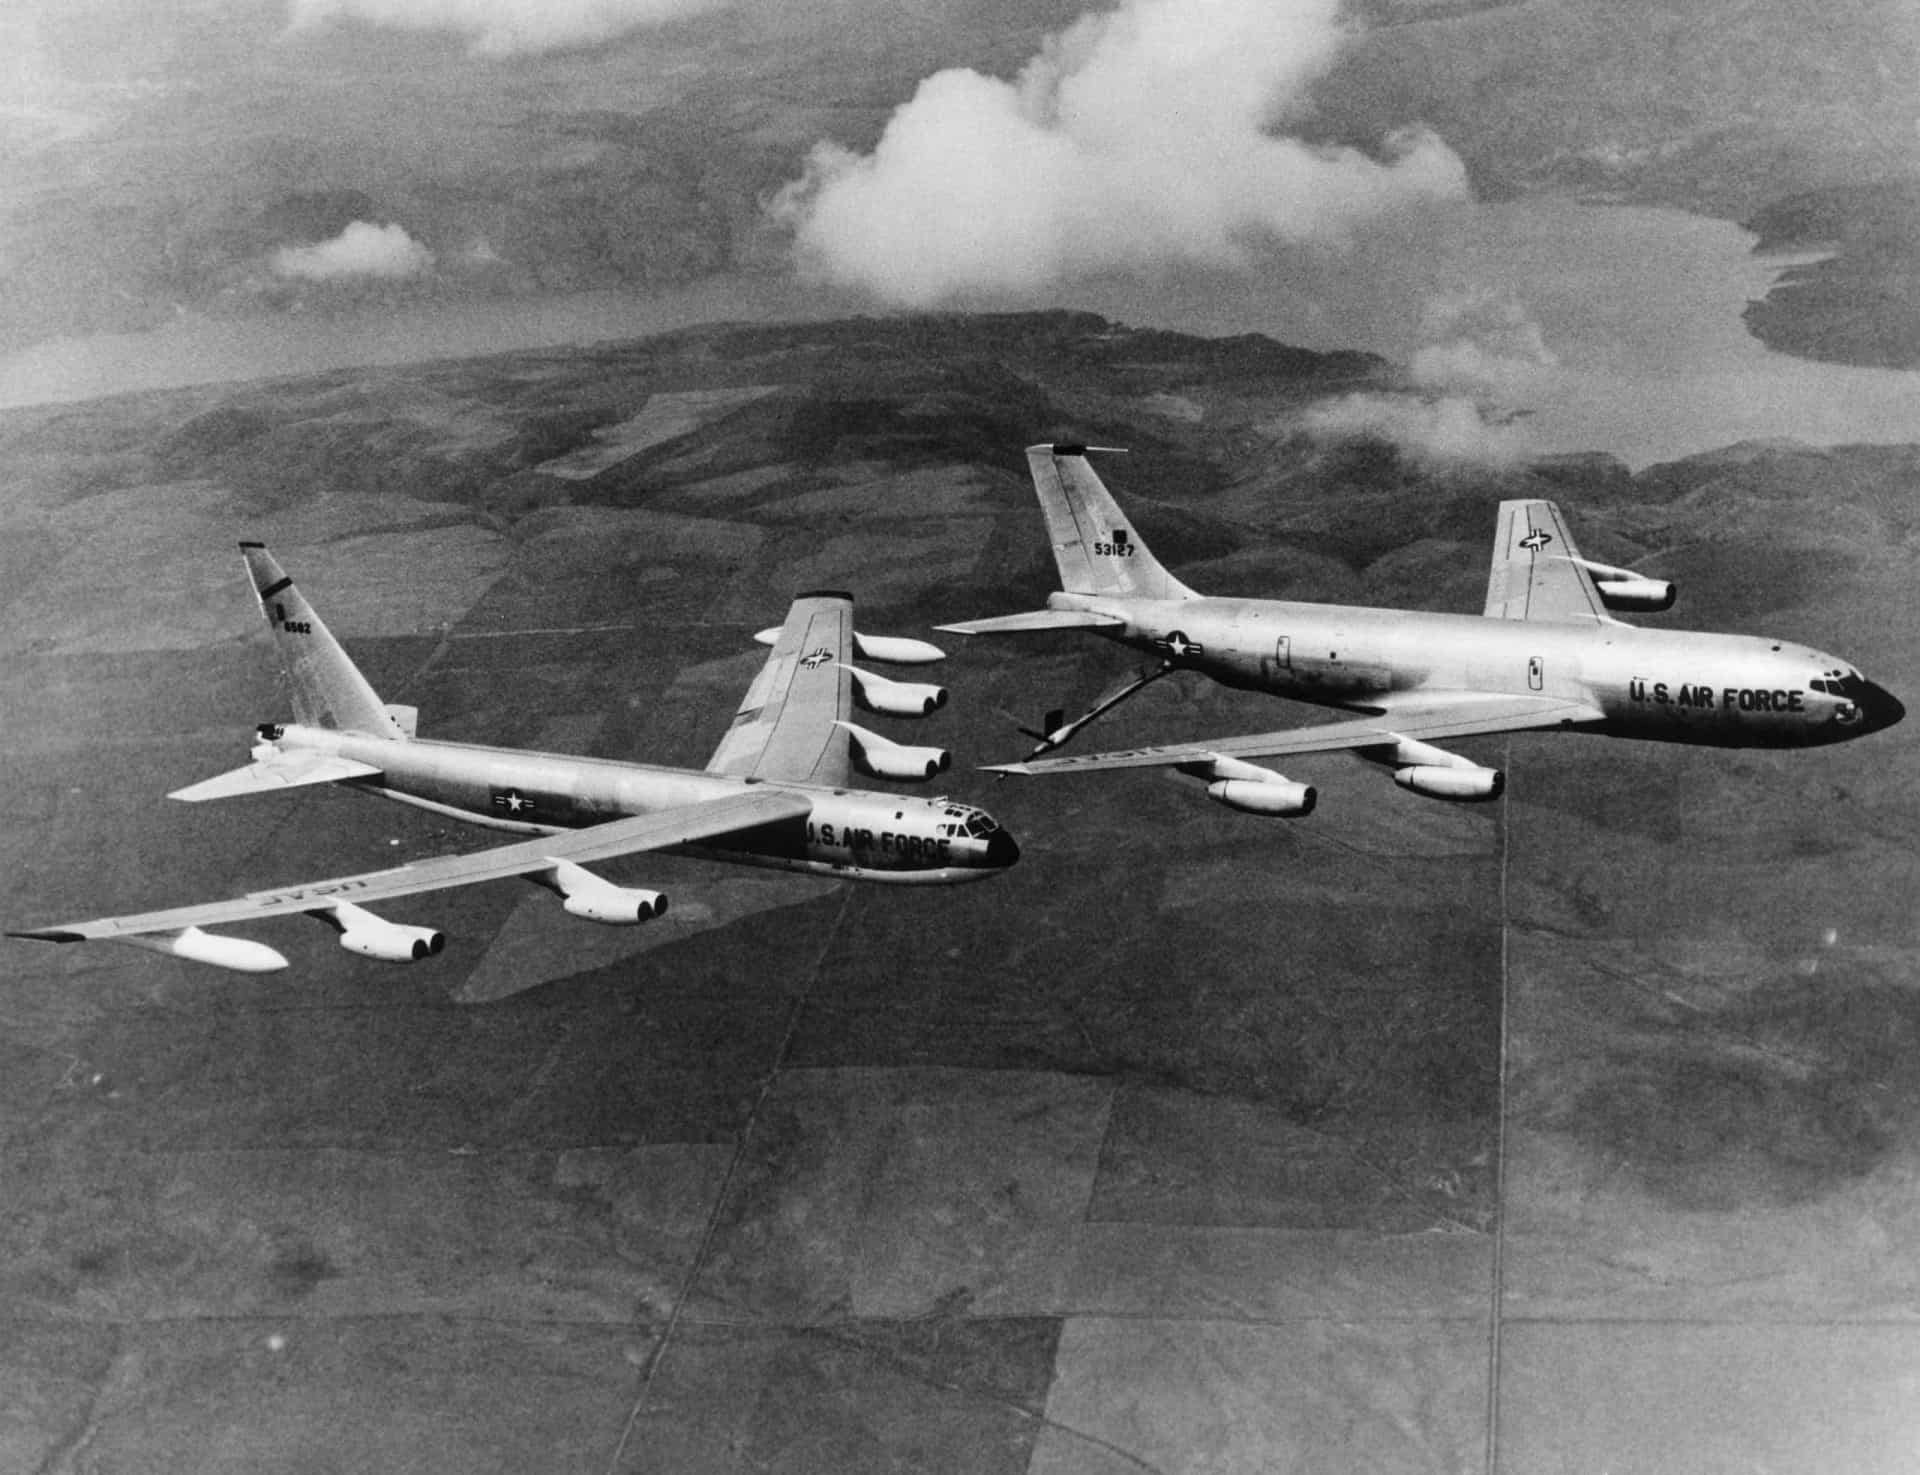 <p>Operation Chrome Dome was a US Air Force Cold War-era mission from 1960 to 1968 that required a B-52 strategic bomber armed with thermonuclear weapons to remain on continuous airborne alert. The aircraft was refueled in the air (pictured).</p>